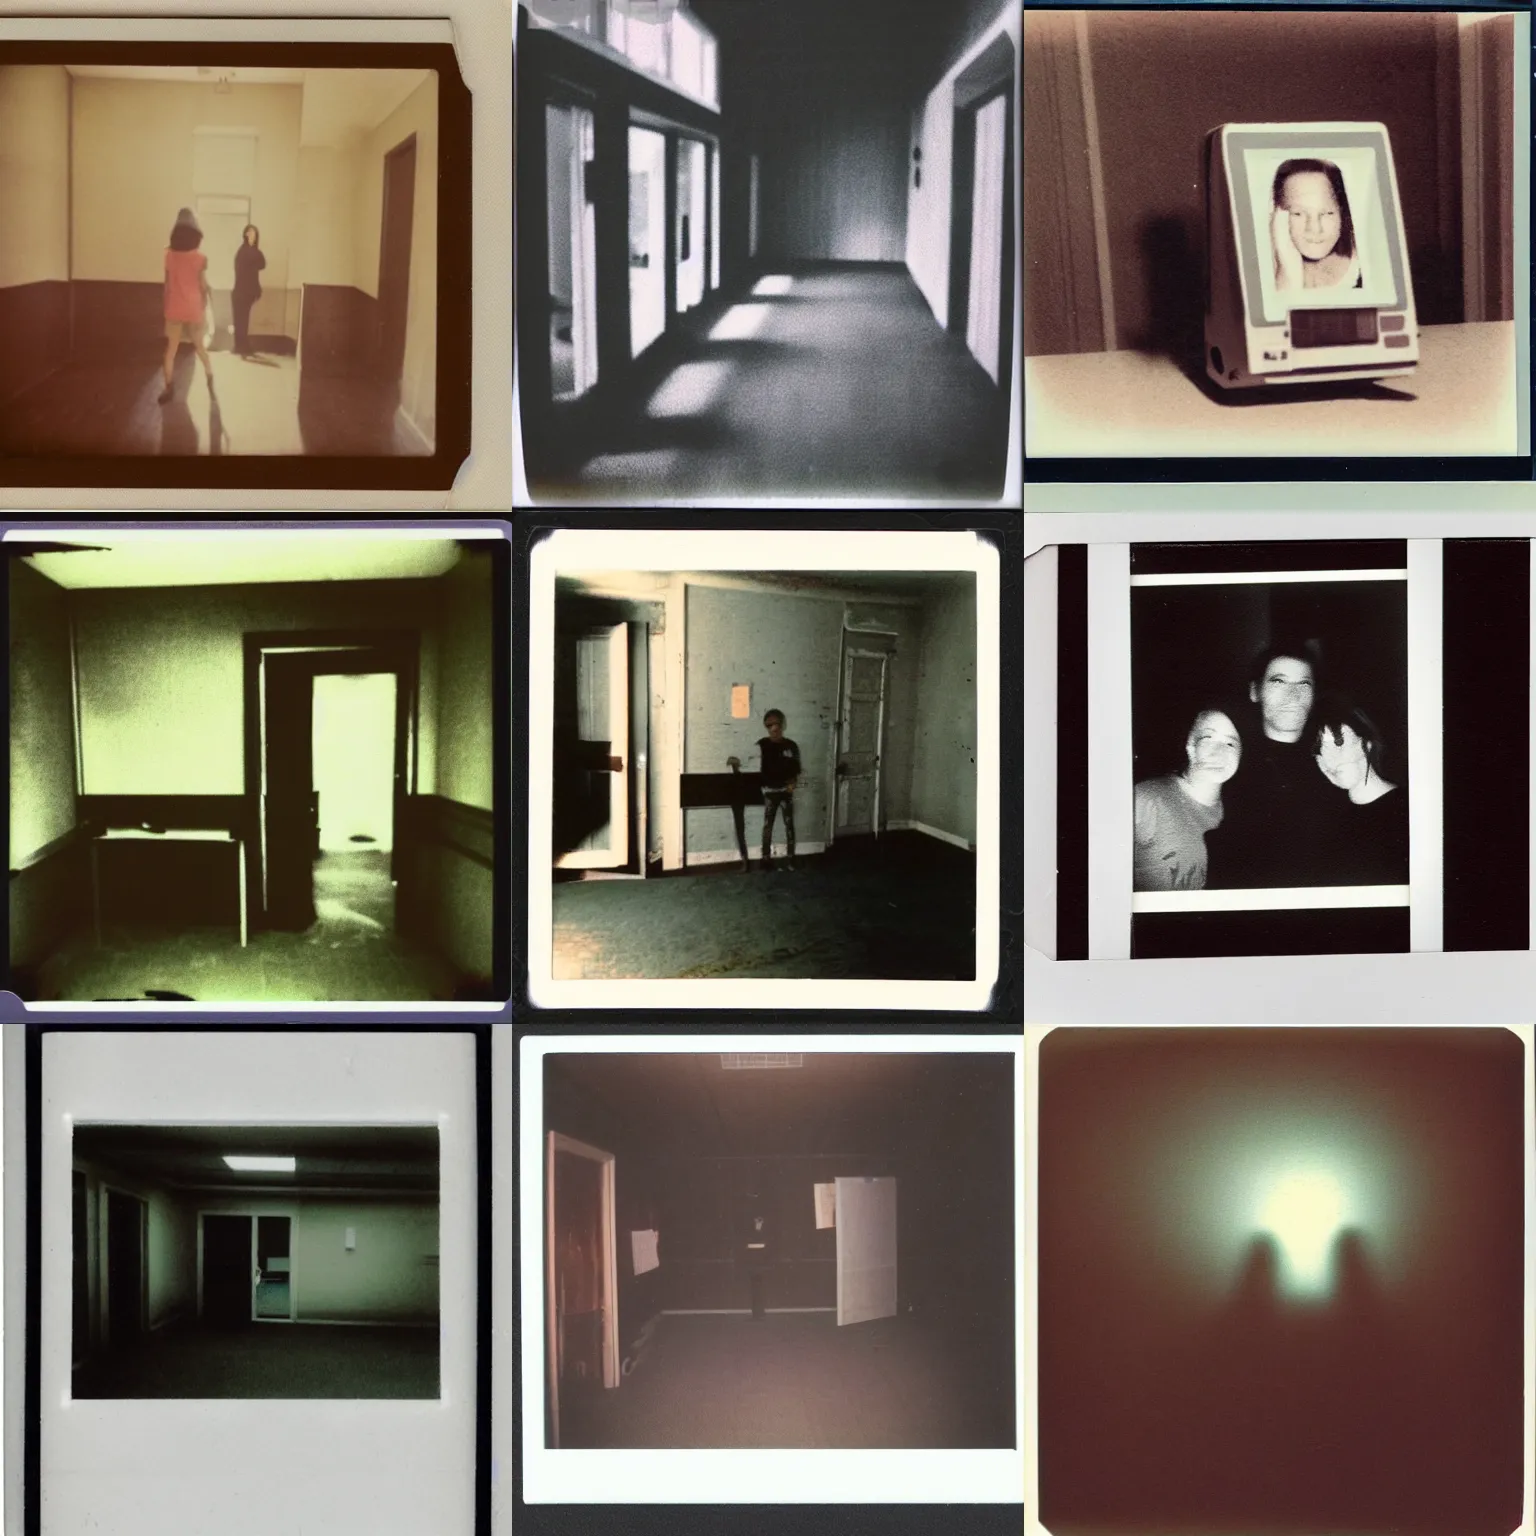 Prompt: polaroid photo proof that the ghost in the empty community room is real!